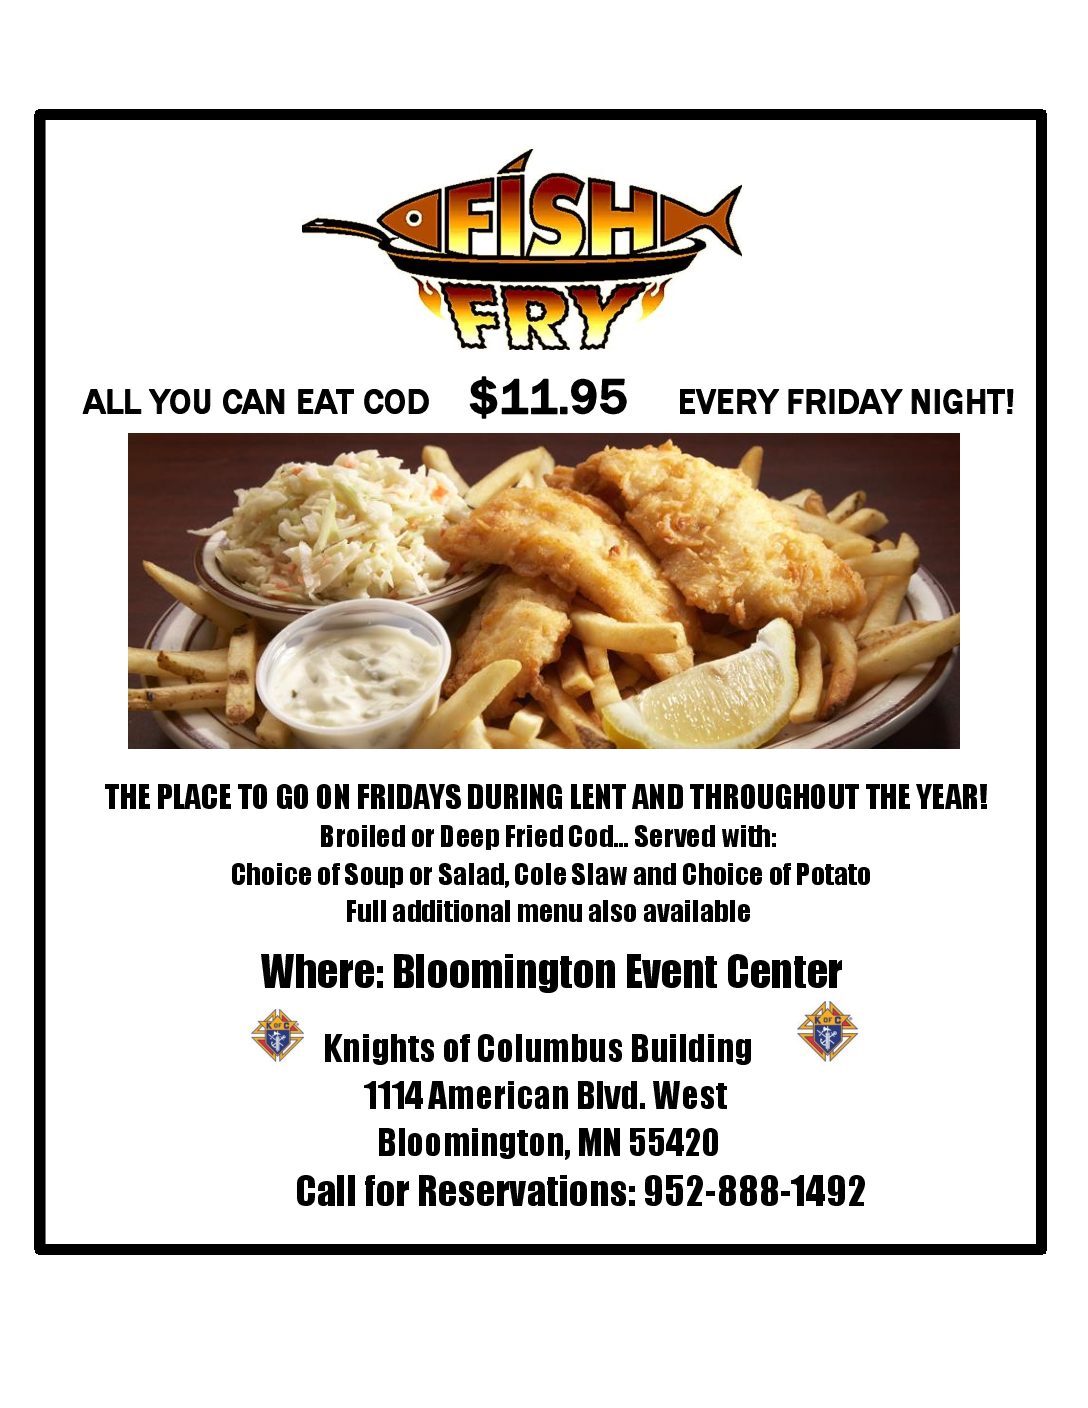 Fish Friday Special – All You Can Eat Cod!